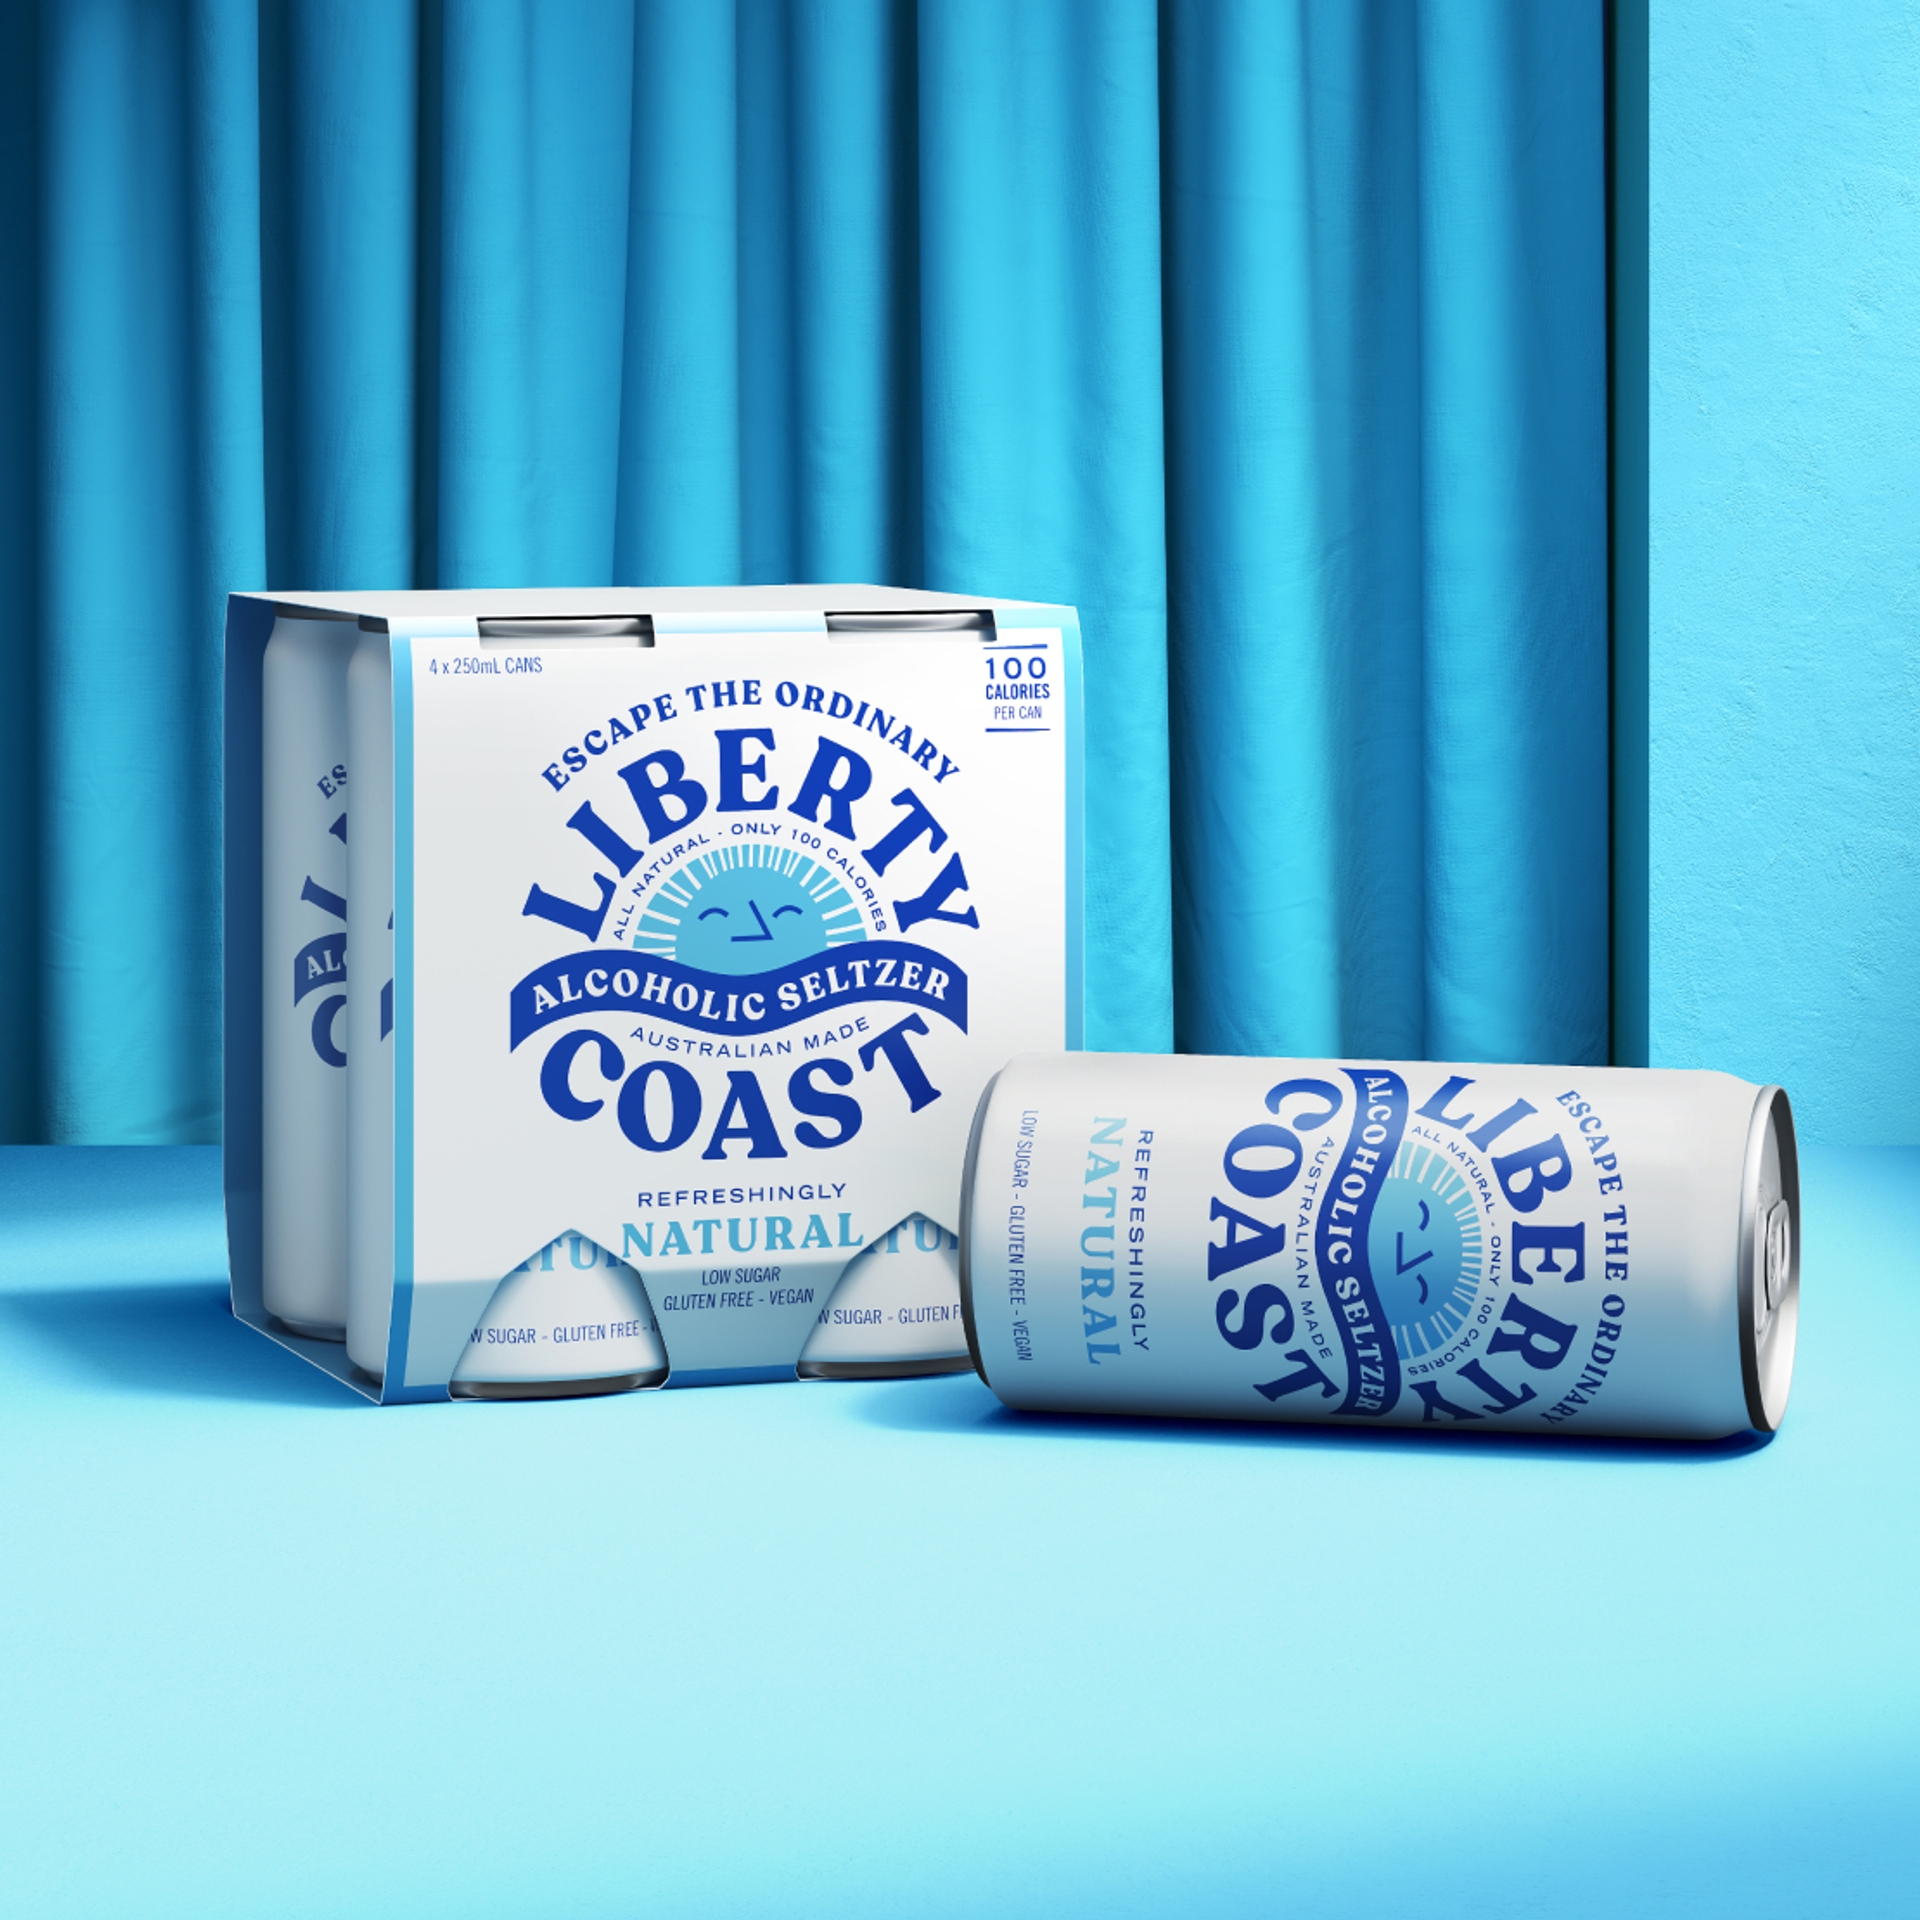 Liberty Coast Natural packaging design by packaging design agency Our Revolution for alcoholic seltzer brand Liberty Coast in front of a light blue curtain